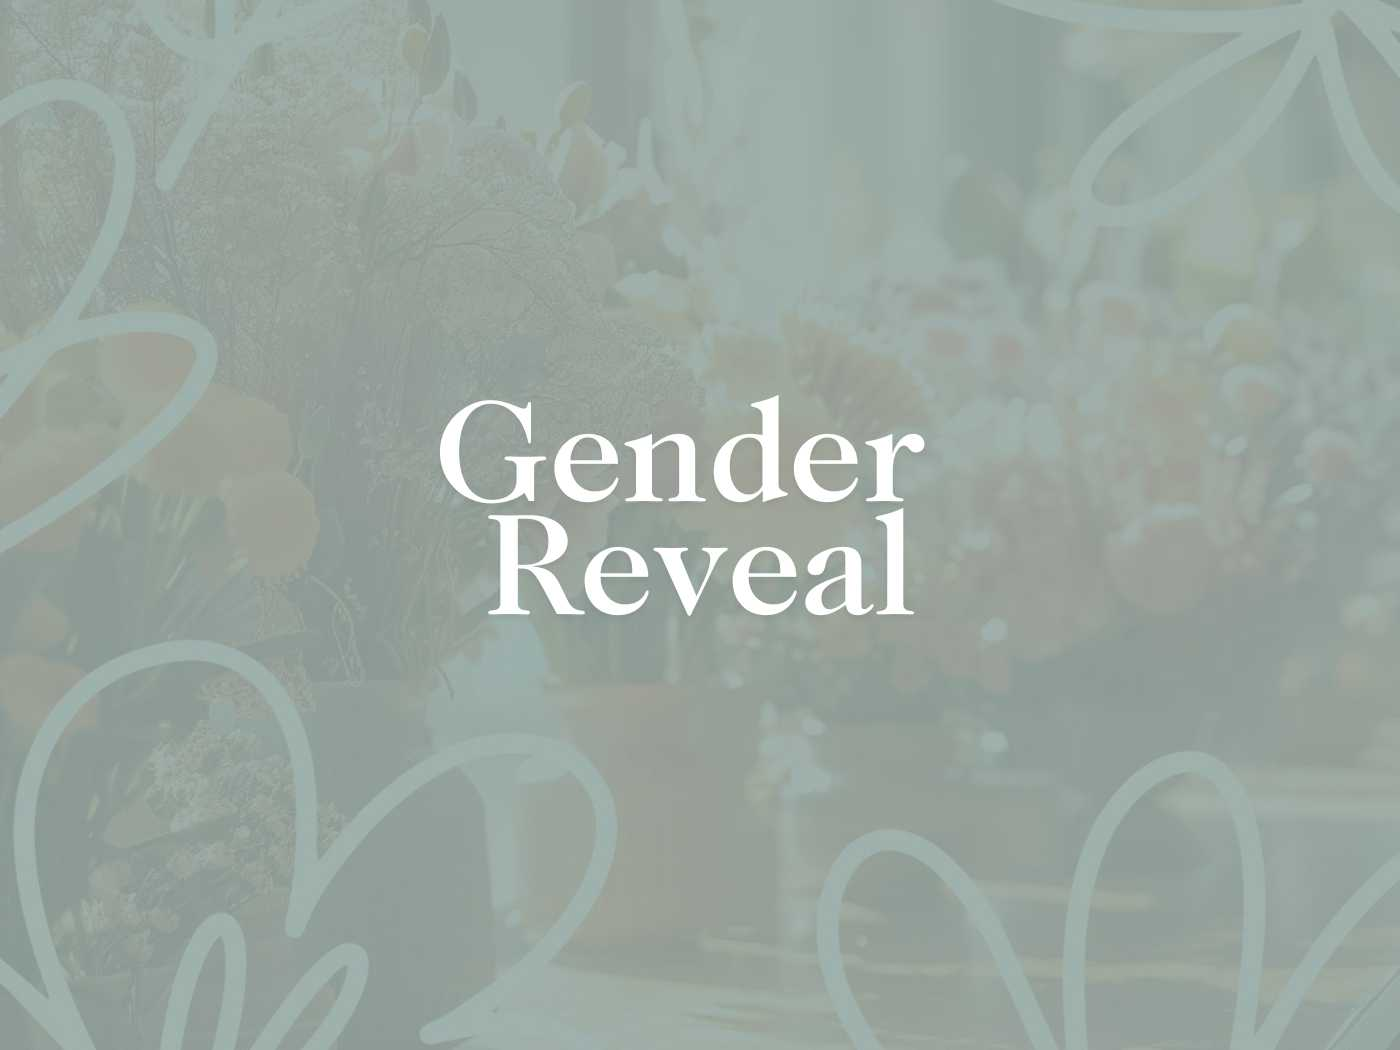 Gender Reveal Collection from Fabulous Flowers and Gifts, featuring a beautiful selection of blooms and gift boxes perfect for celebrating a new arrival.